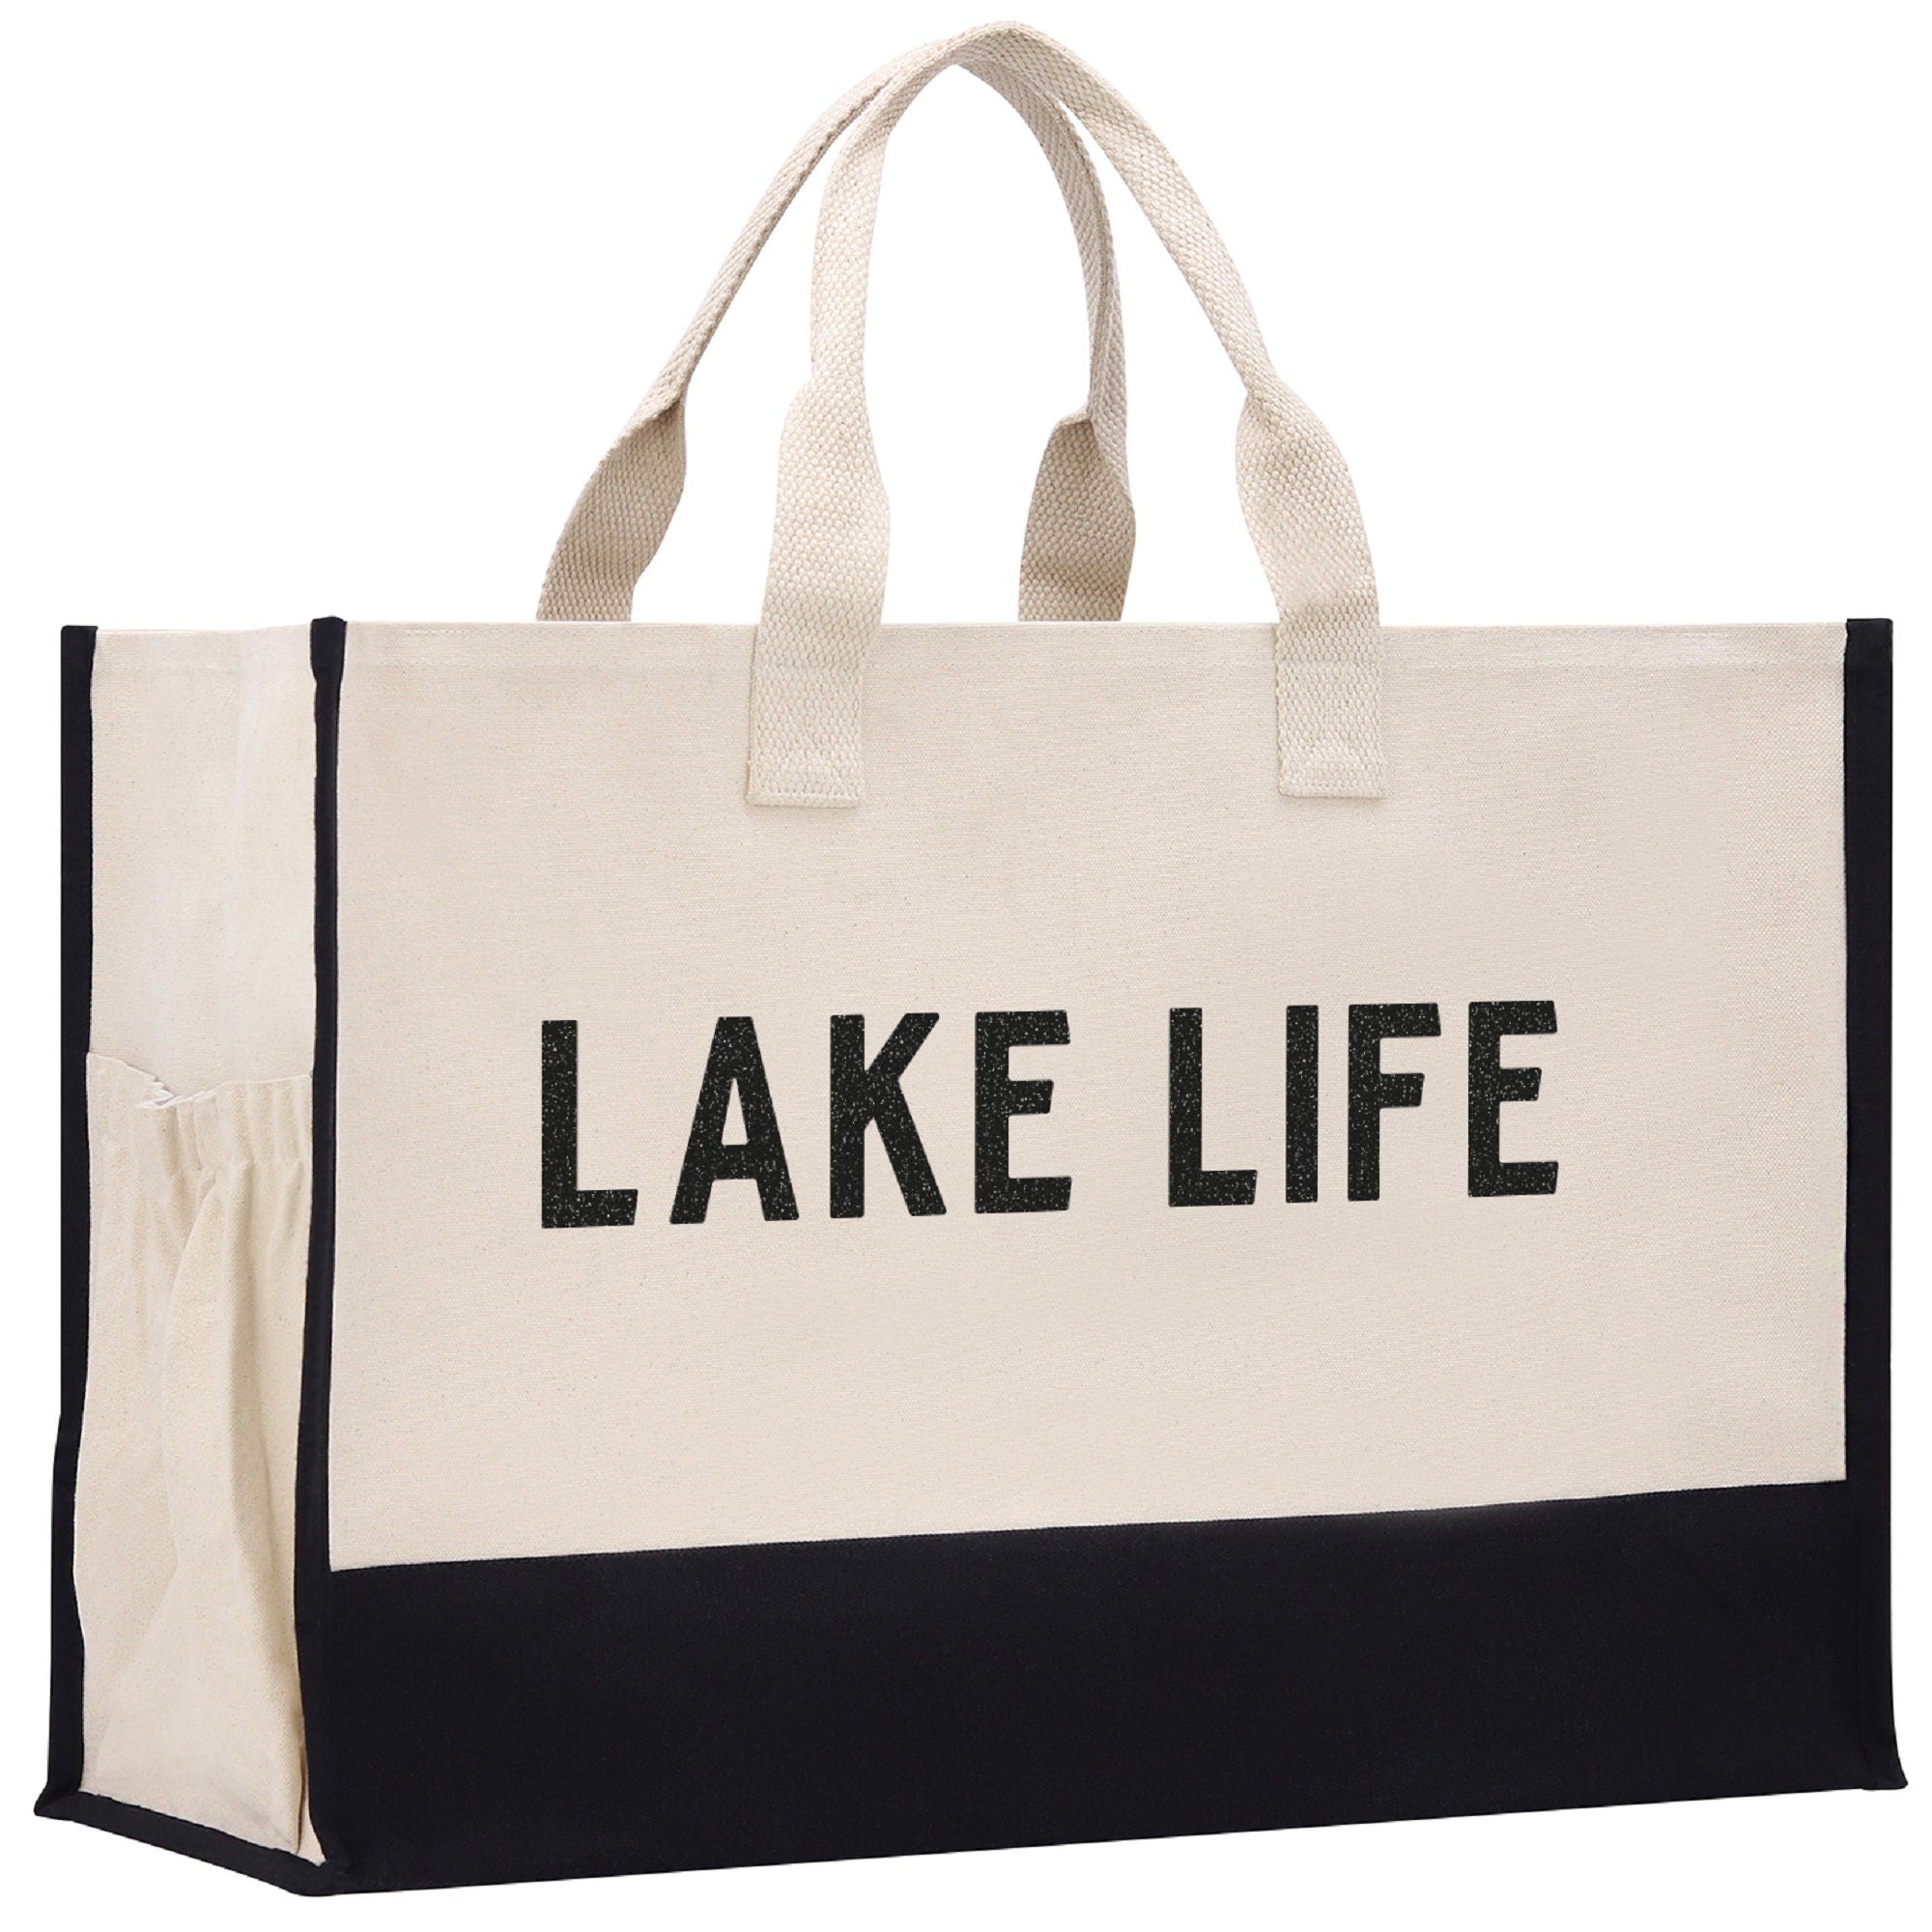 Lake Life Beach Tote Bag XL - Oversized Chic Tote Bag with Zipper and Inner Pocket- Gift for Her - Boat Bag - Weekender Bag - Lake Life Gift